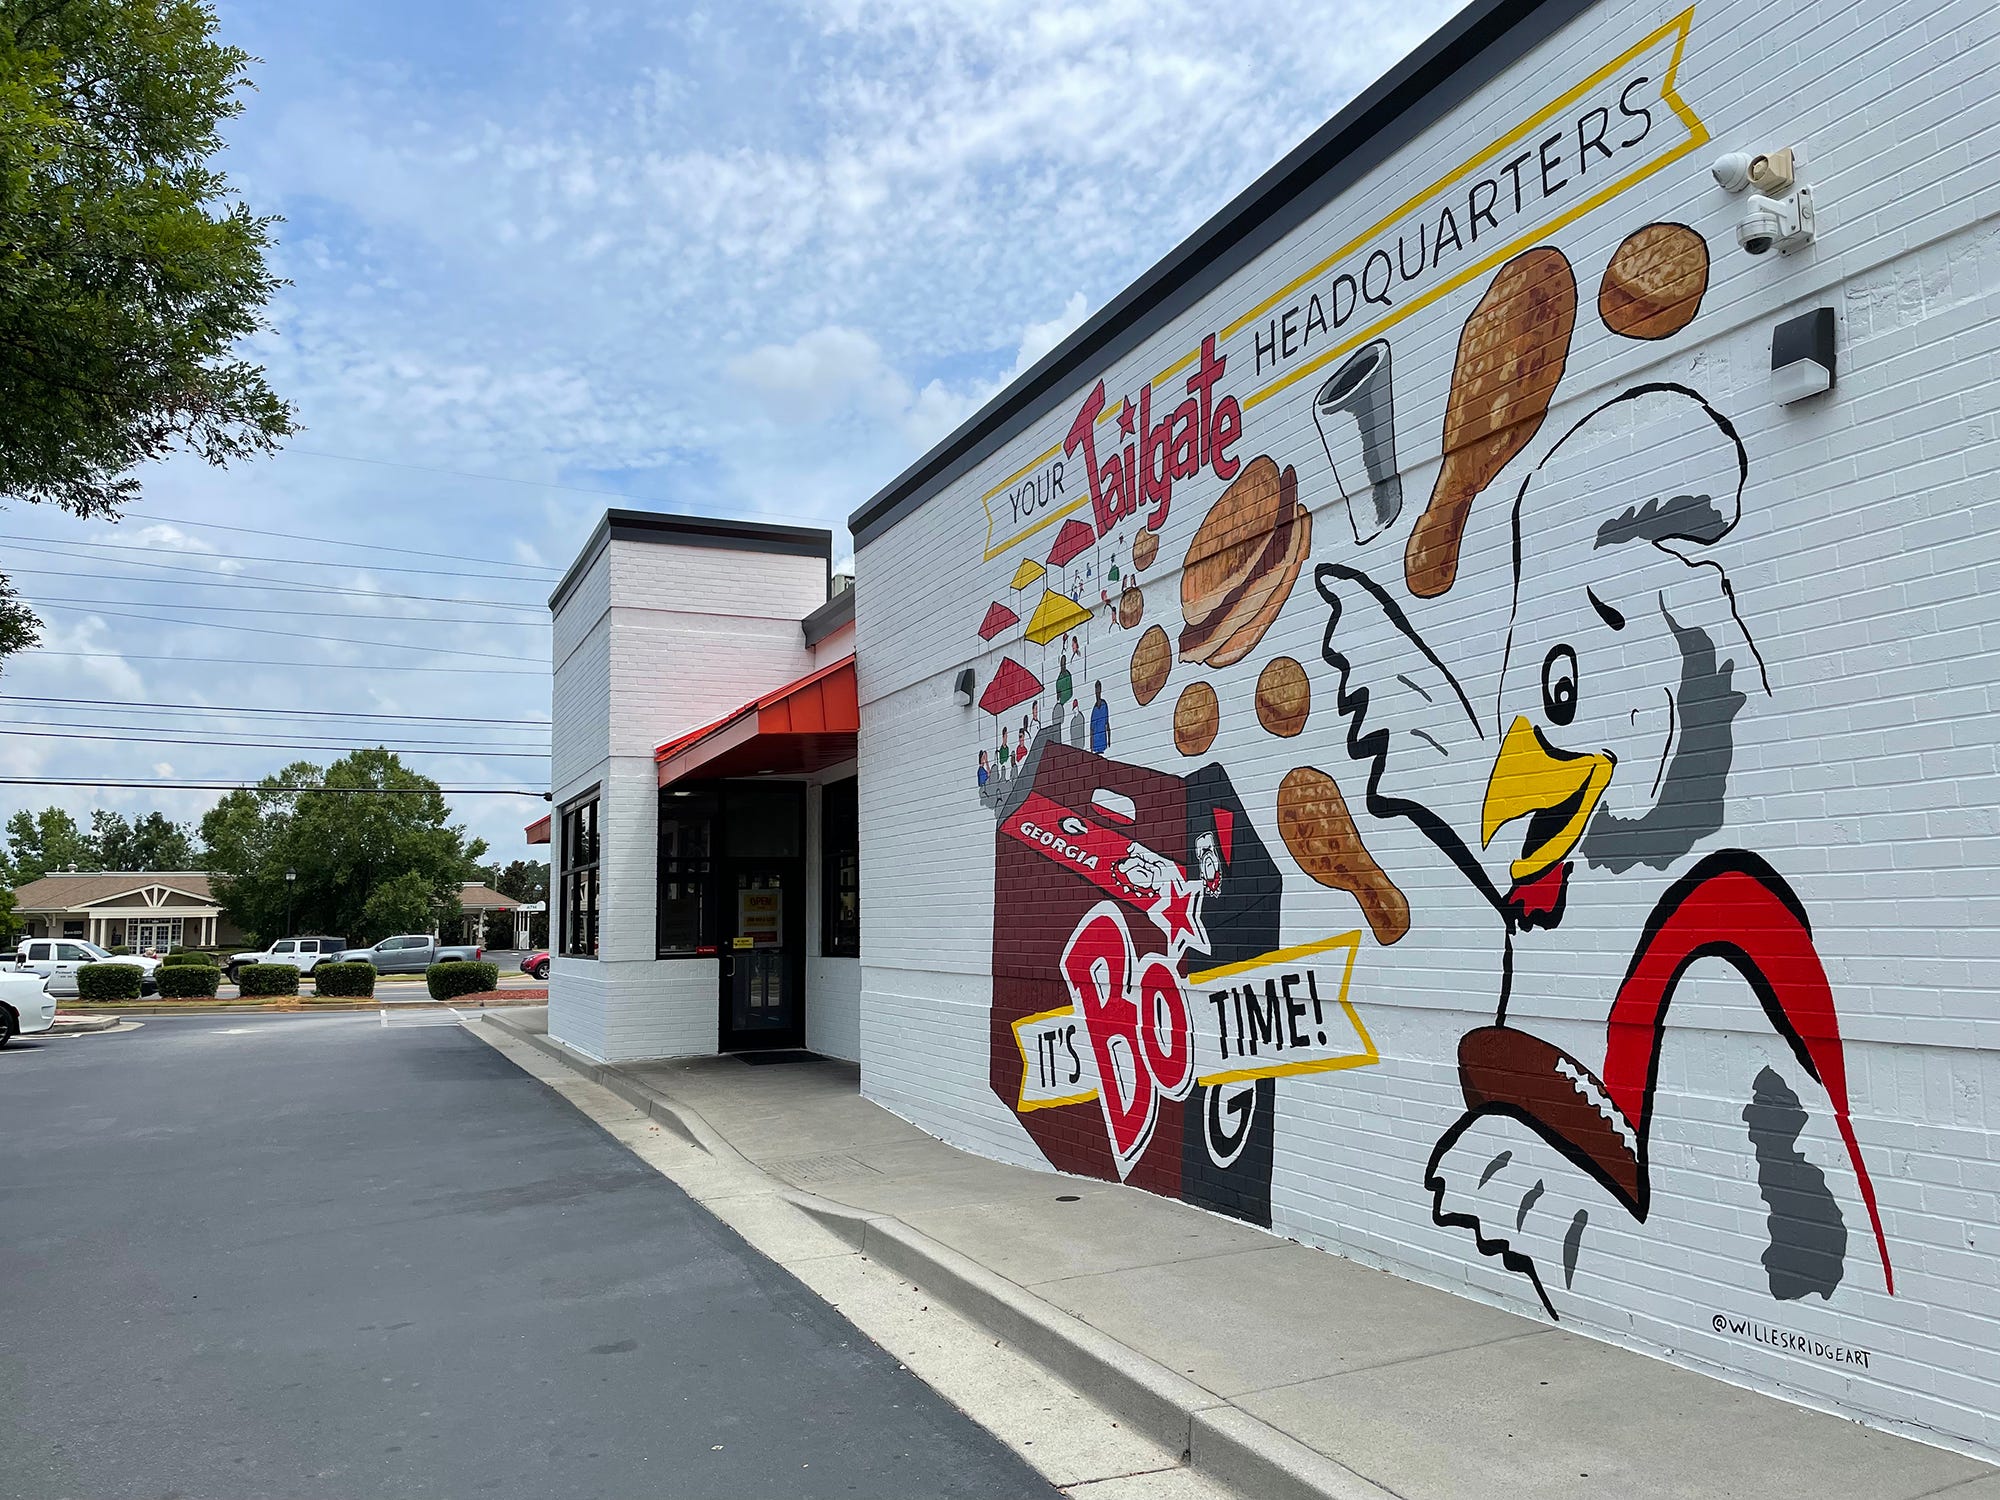 Athens restaurant supported local artist who painted mural in heatwave